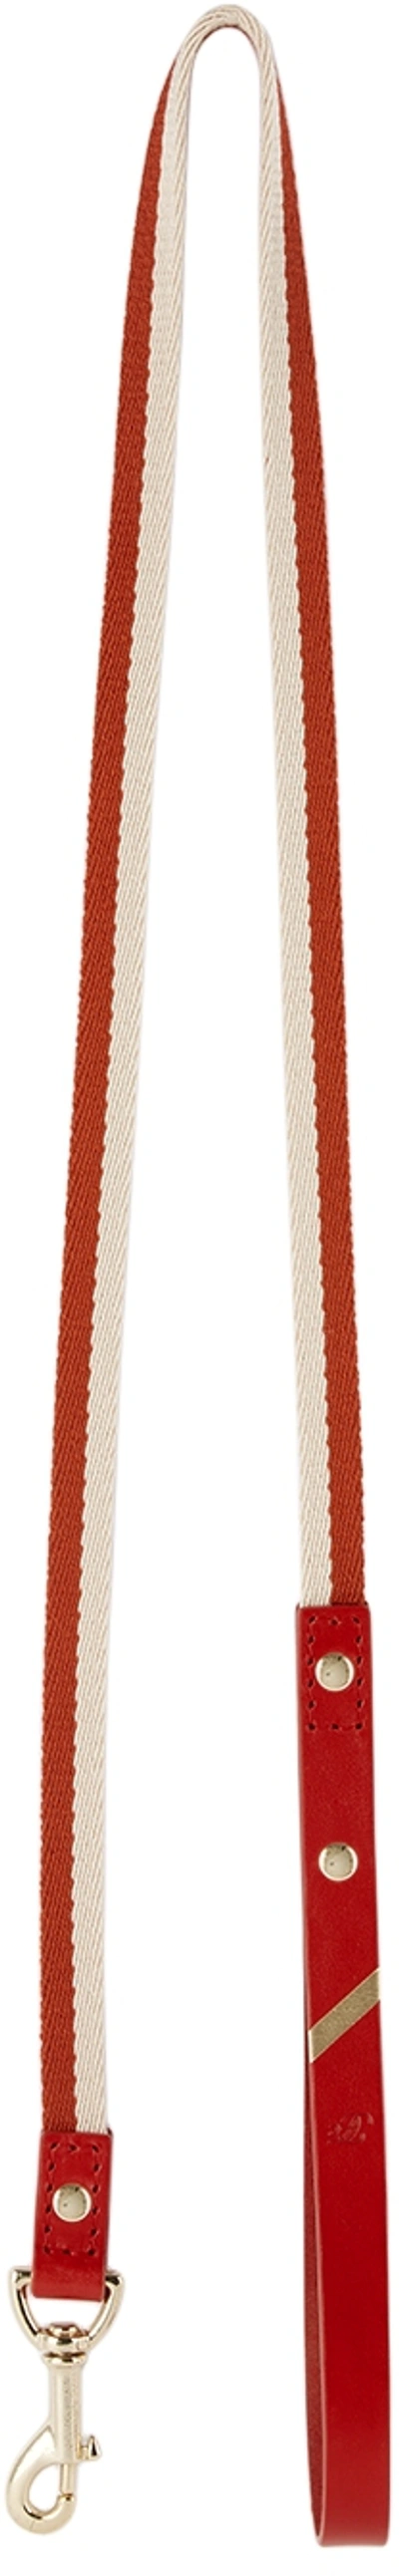 Fantastical Creatures Club Red & Off-white Stylish Me Leash In Monte Carlo